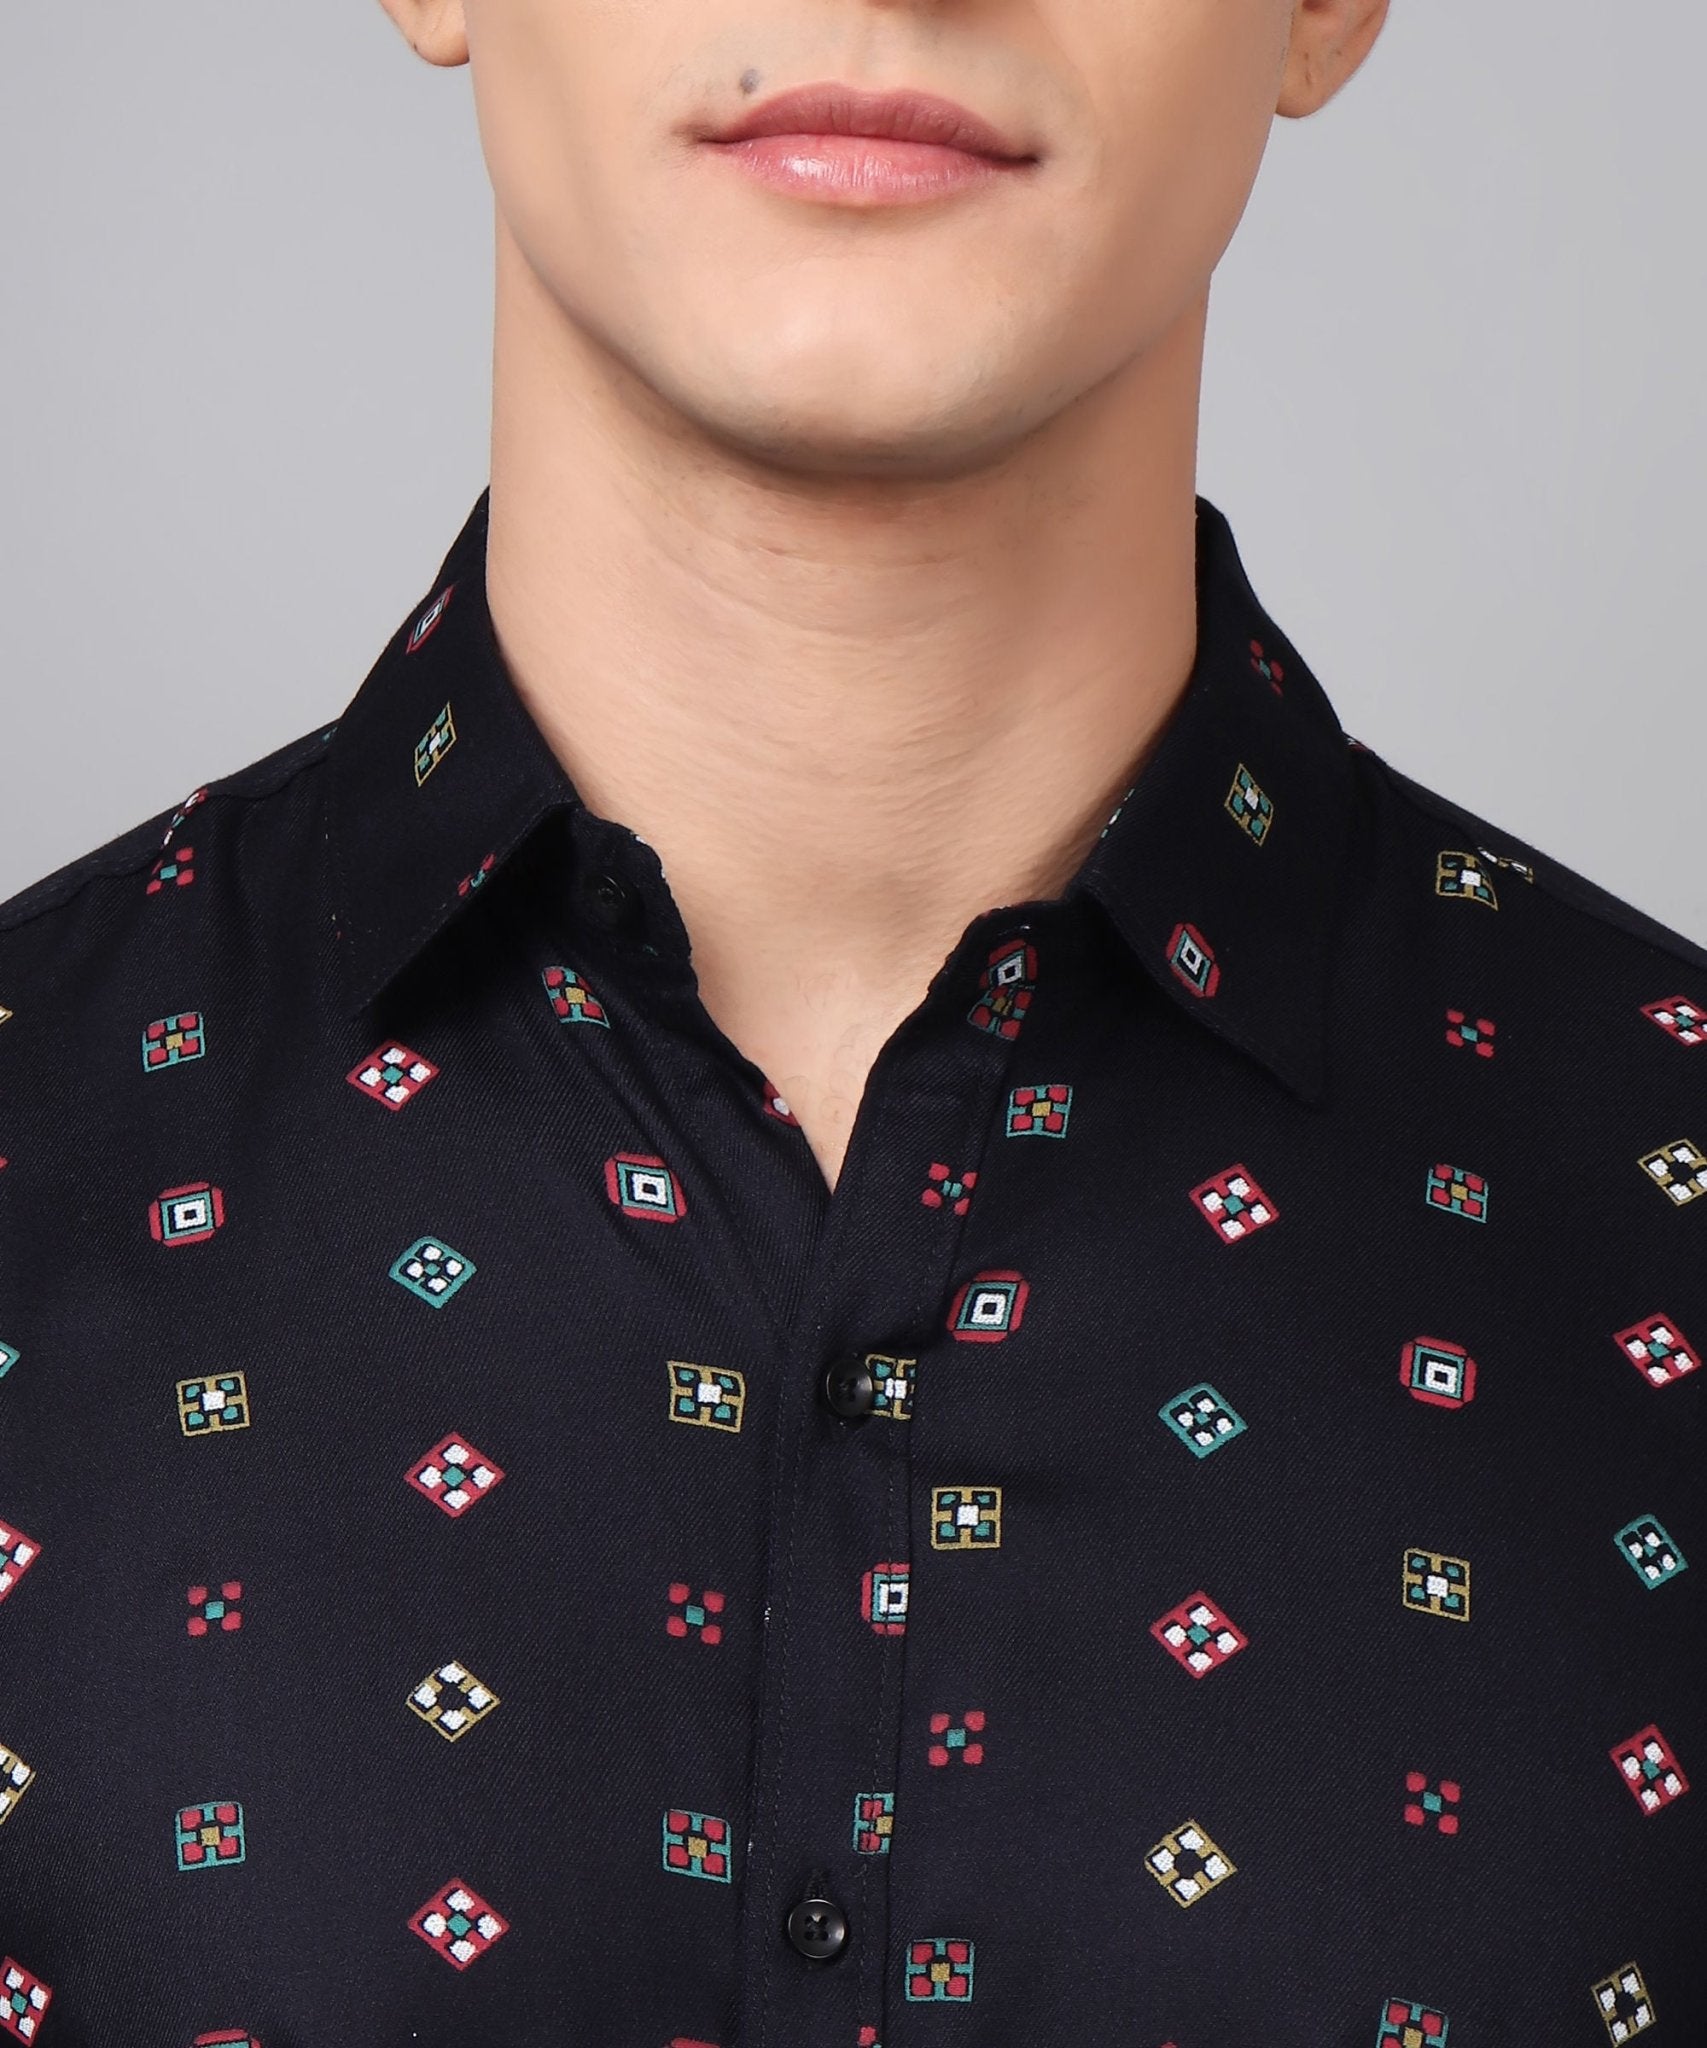 Fashionable Trybuy Premium Printed Cotton Casual Shirt for Men - TryBuy® USA🇺🇸